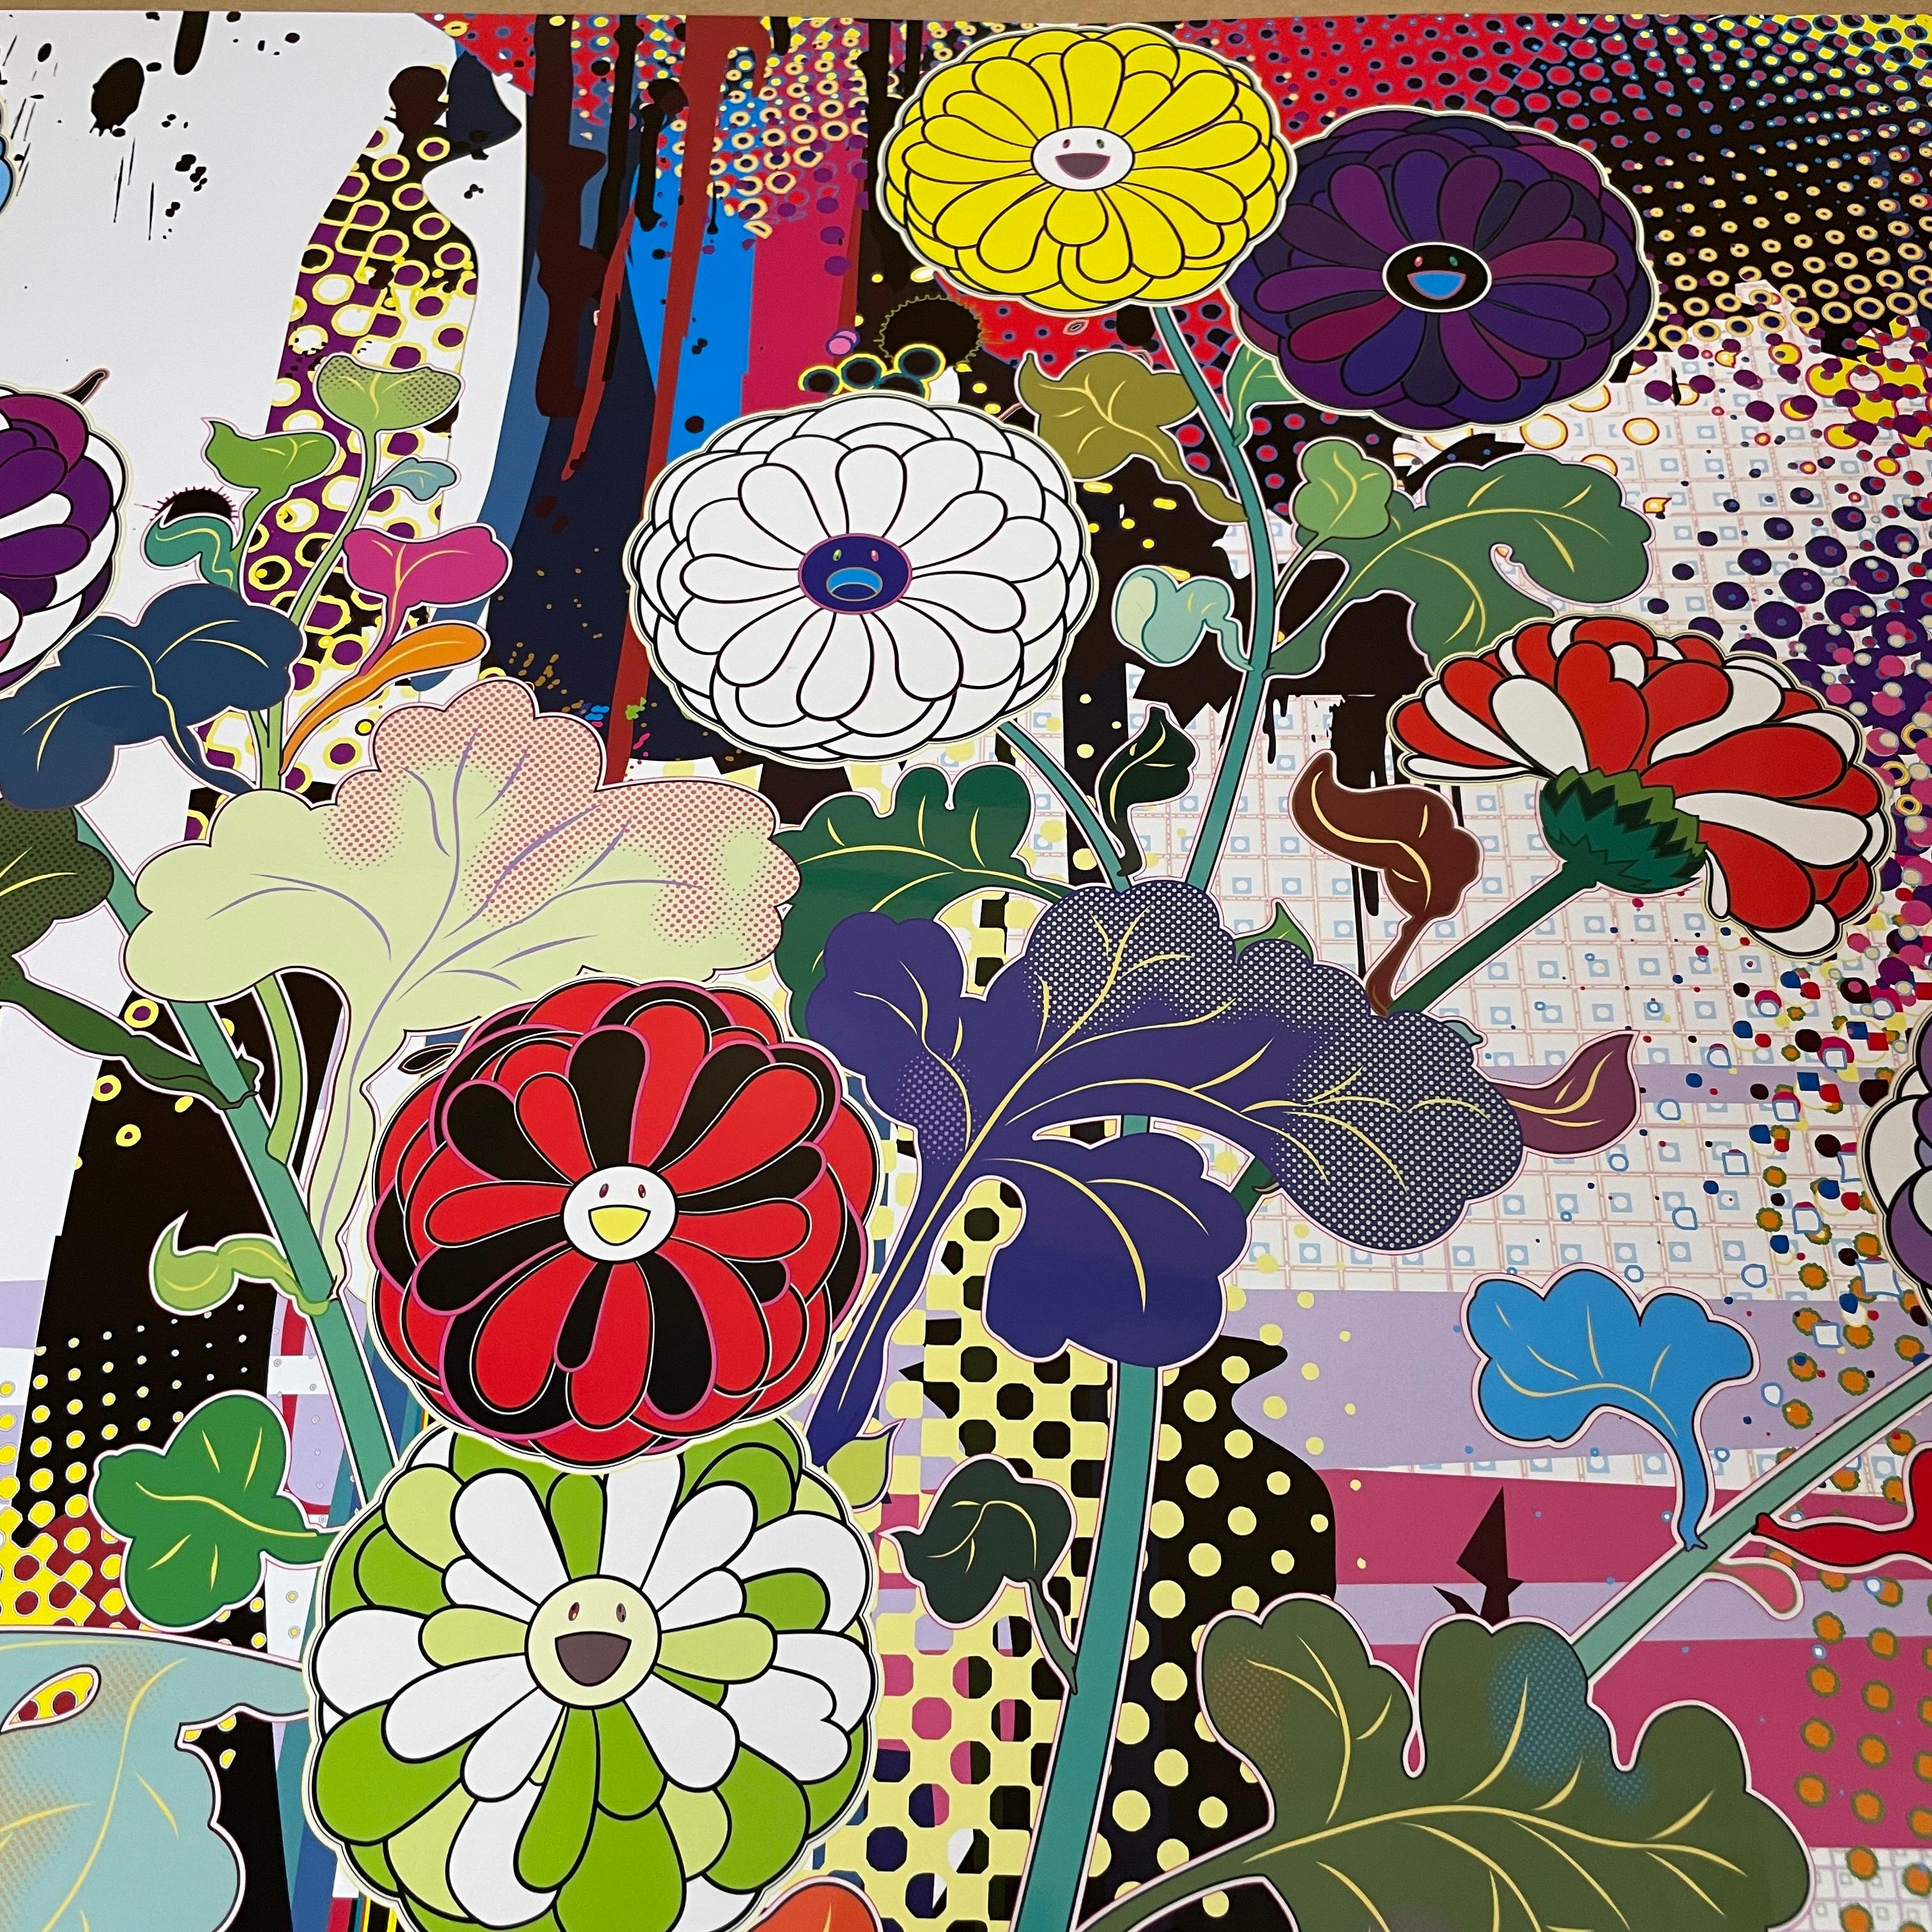 Artist: Takashi Murakami
Title: Kōrin Kyoto
Year: 2020
Edition: 300
Size: 720 x 762.5 mm
Medium: Offset print, cold stamp and high gloss varnishing

This is hand signed by Takashi Murakami.

Note: This will be shipped from Japan so the buyer is